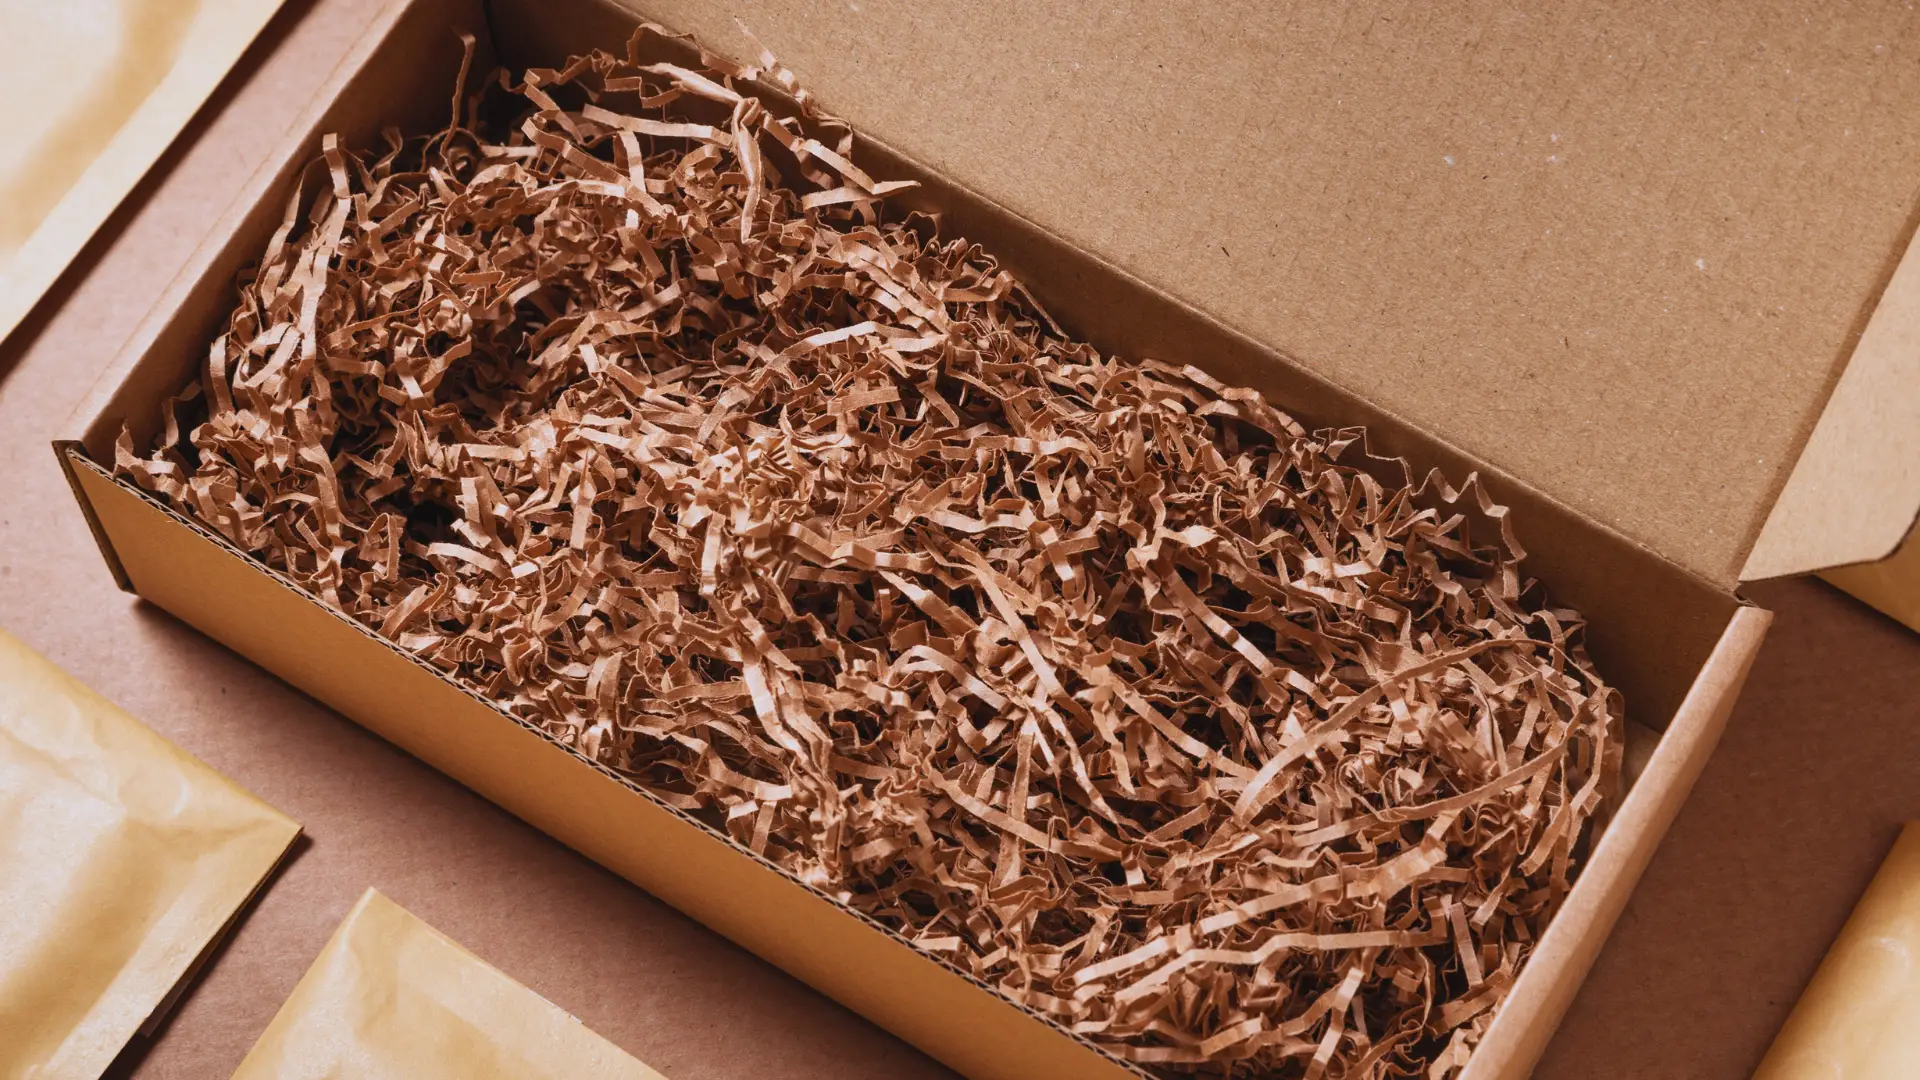 Can You Use Shredded Paper For Mulch